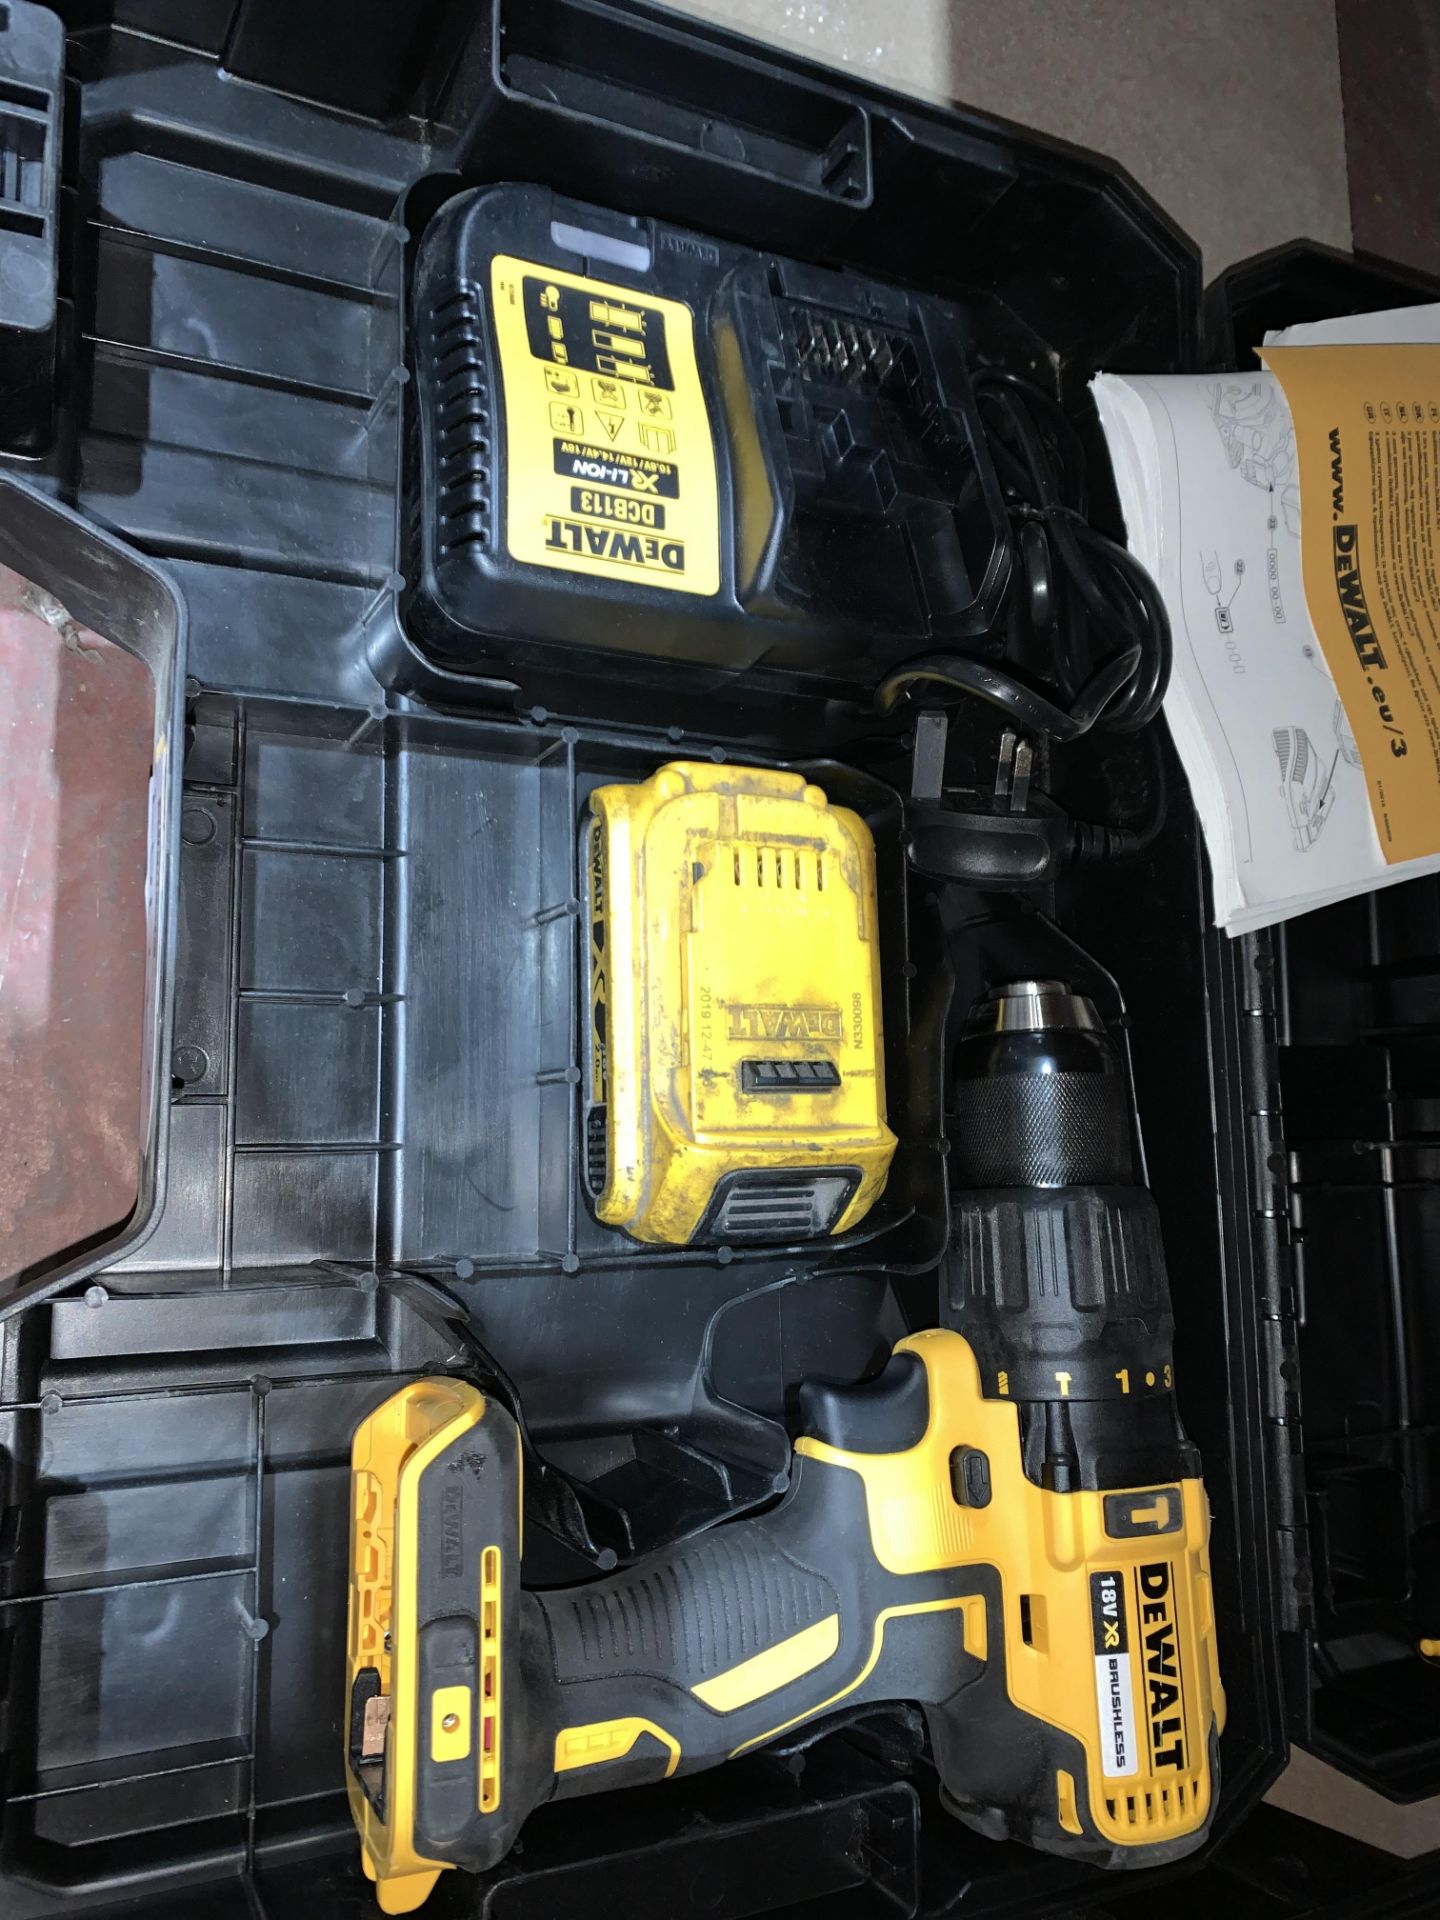 DEWALT DCD778M2T-SFGB 18V 4.0AH LI-ION XR BRUSHLESS CORDLESS COMBI DRILL COMES WITH BATTERY, CHARGER